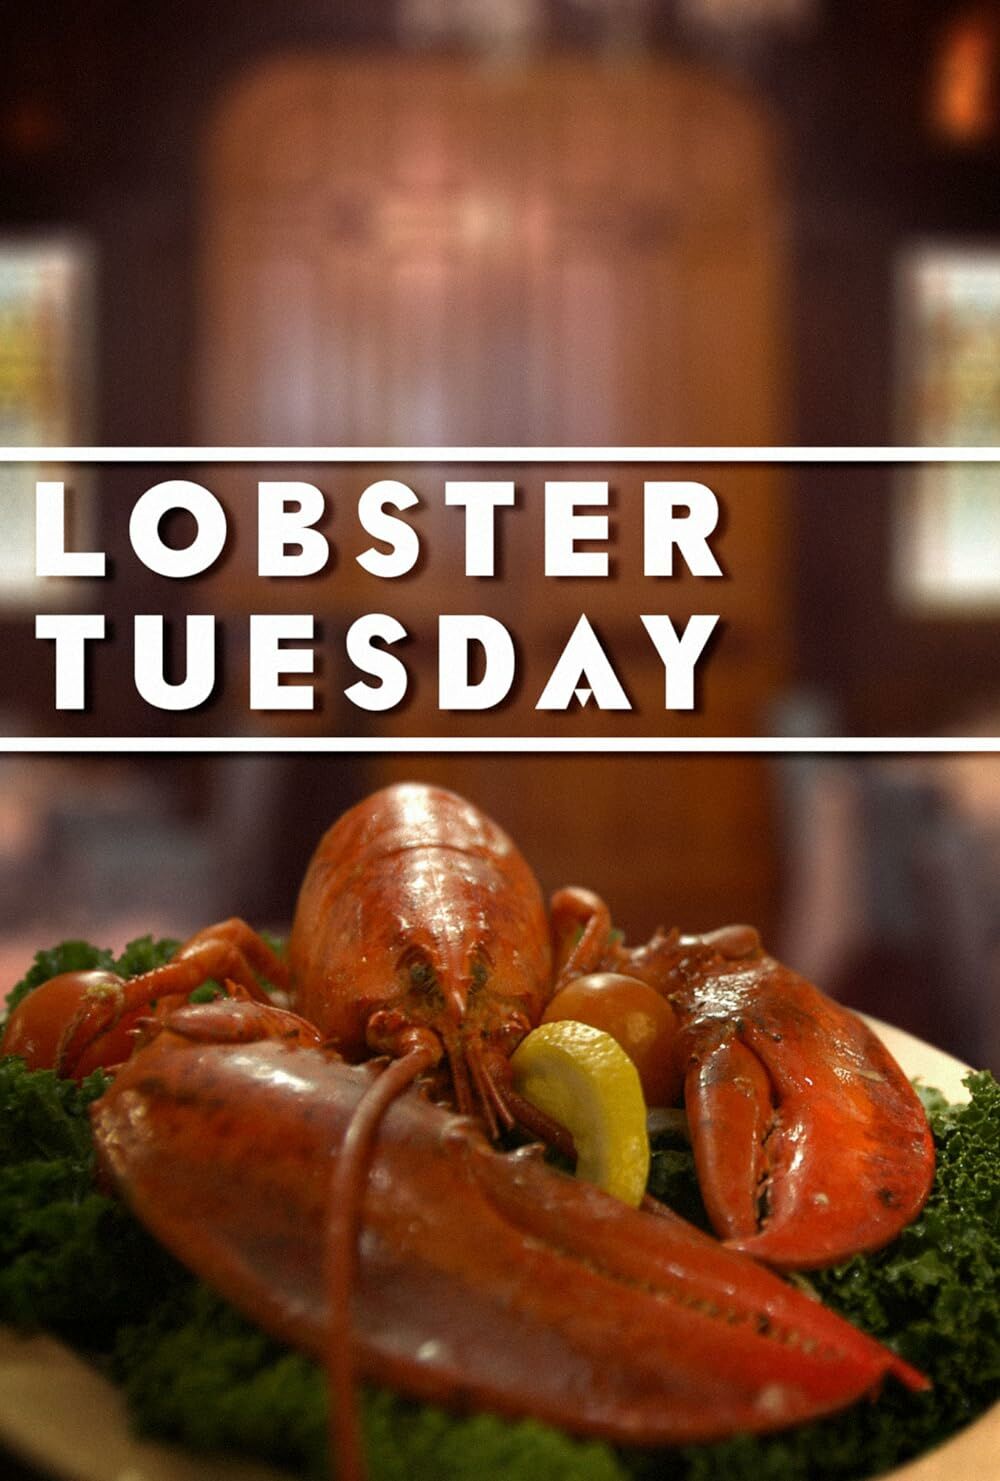 Lobster Tuesday